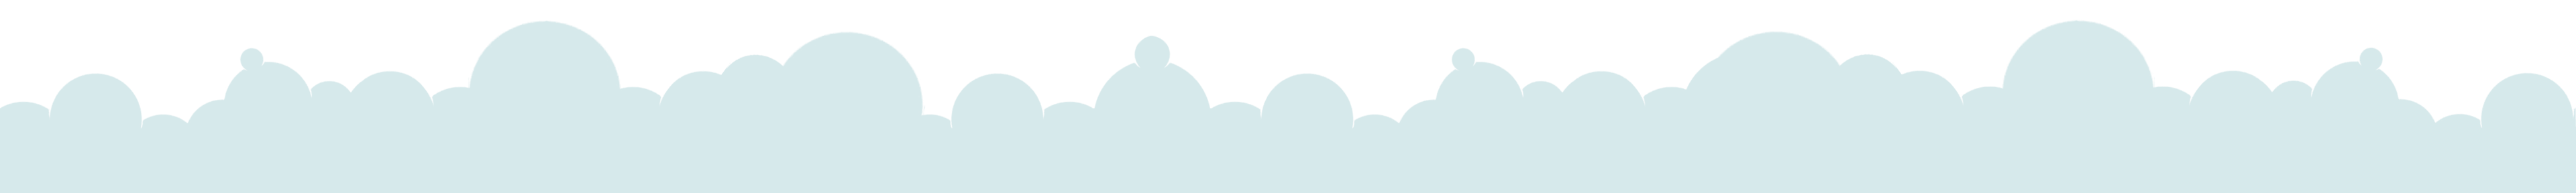 clouds background2